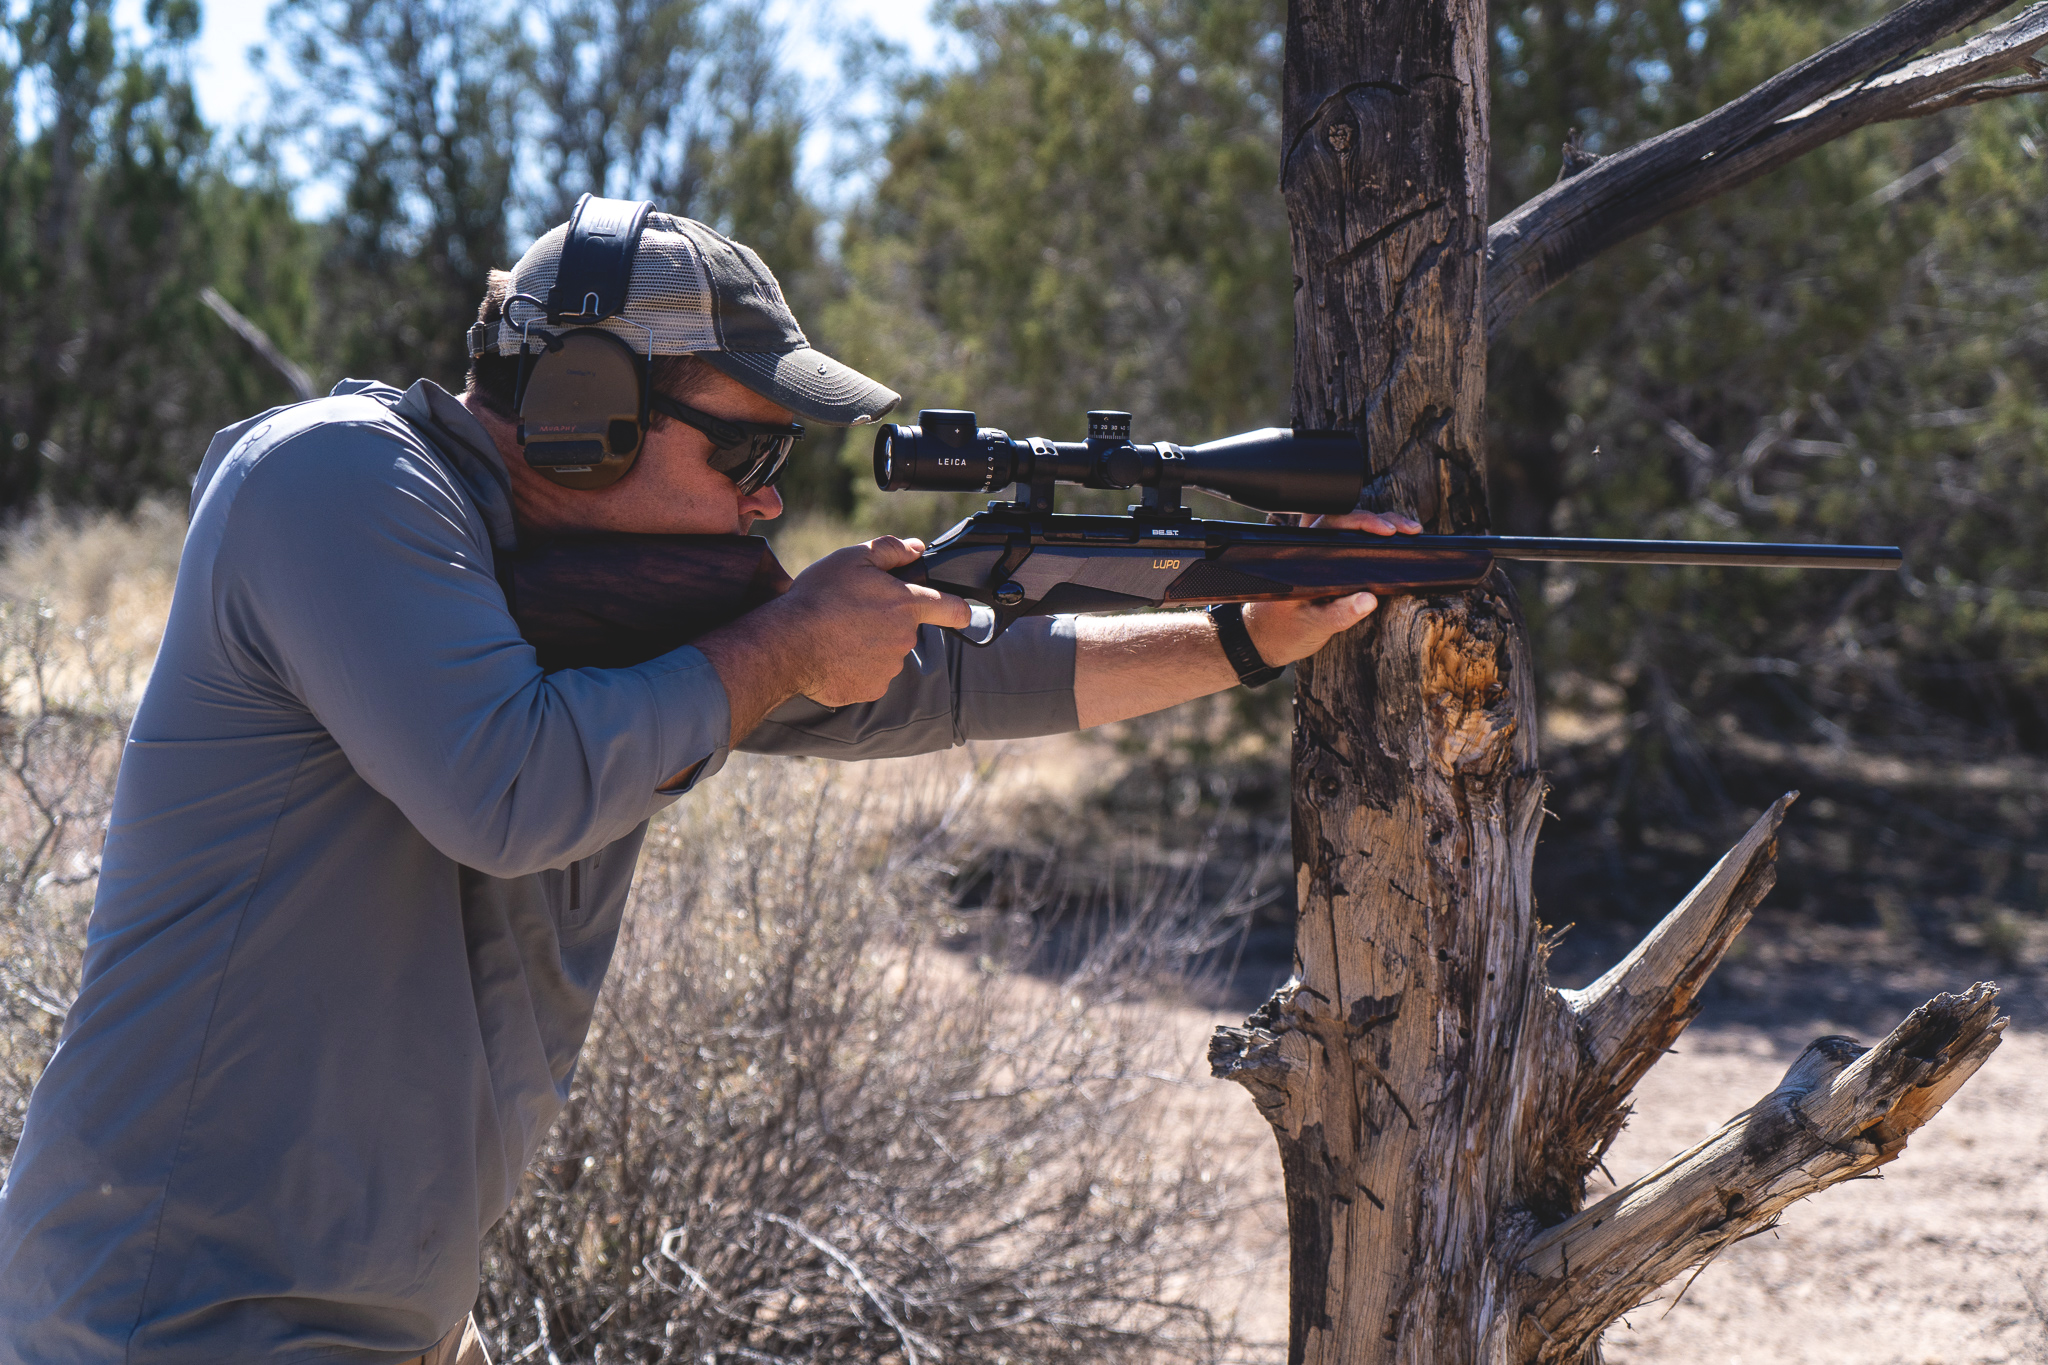 Shooting the Benelli Lupo.